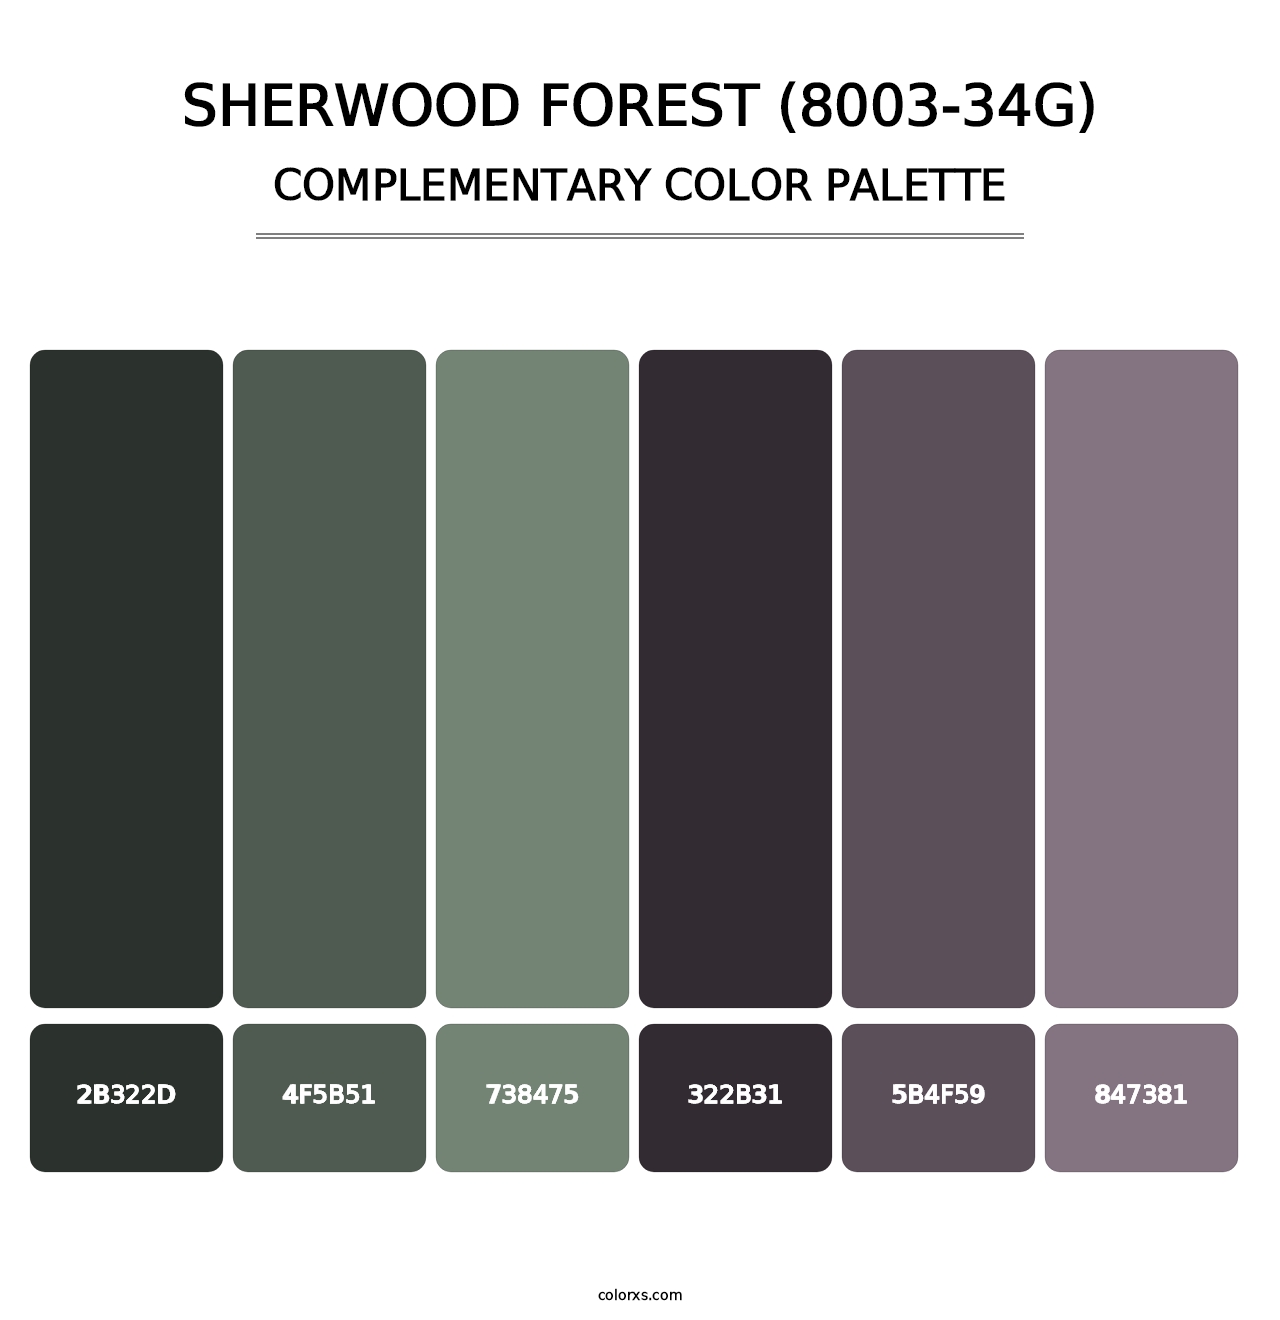 Sherwood Forest (8003-34G) - Complementary Color Palette